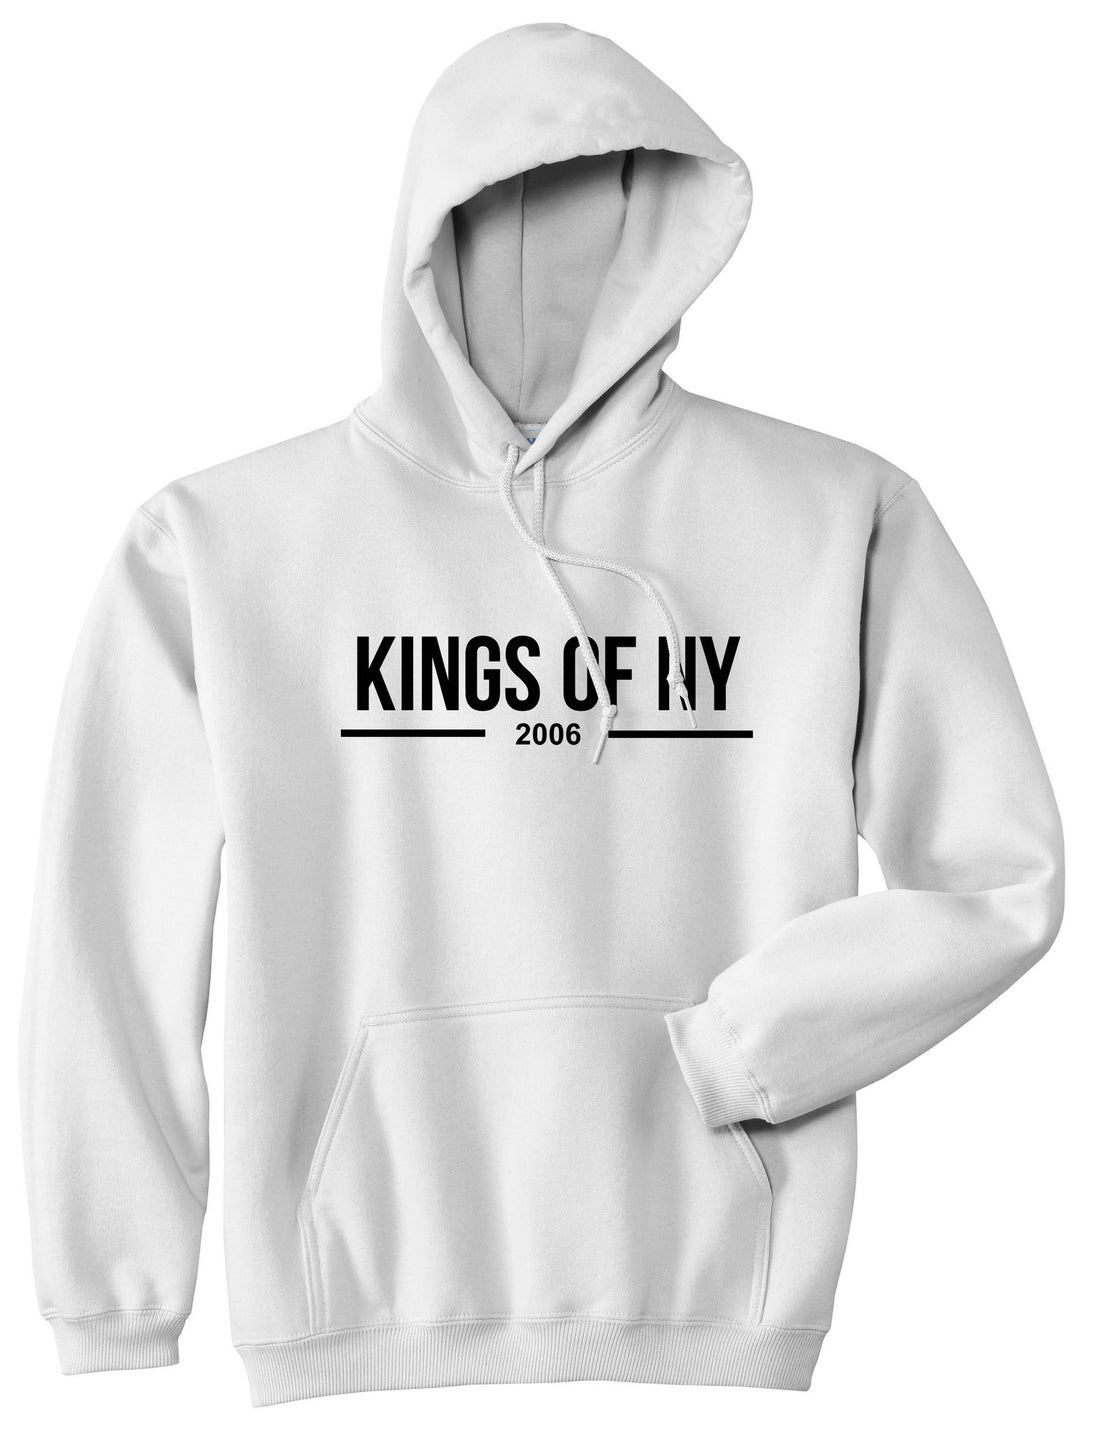 Kings Of NY 2006 Logo Lines Pullover Hoodie in White By Kings Of NY